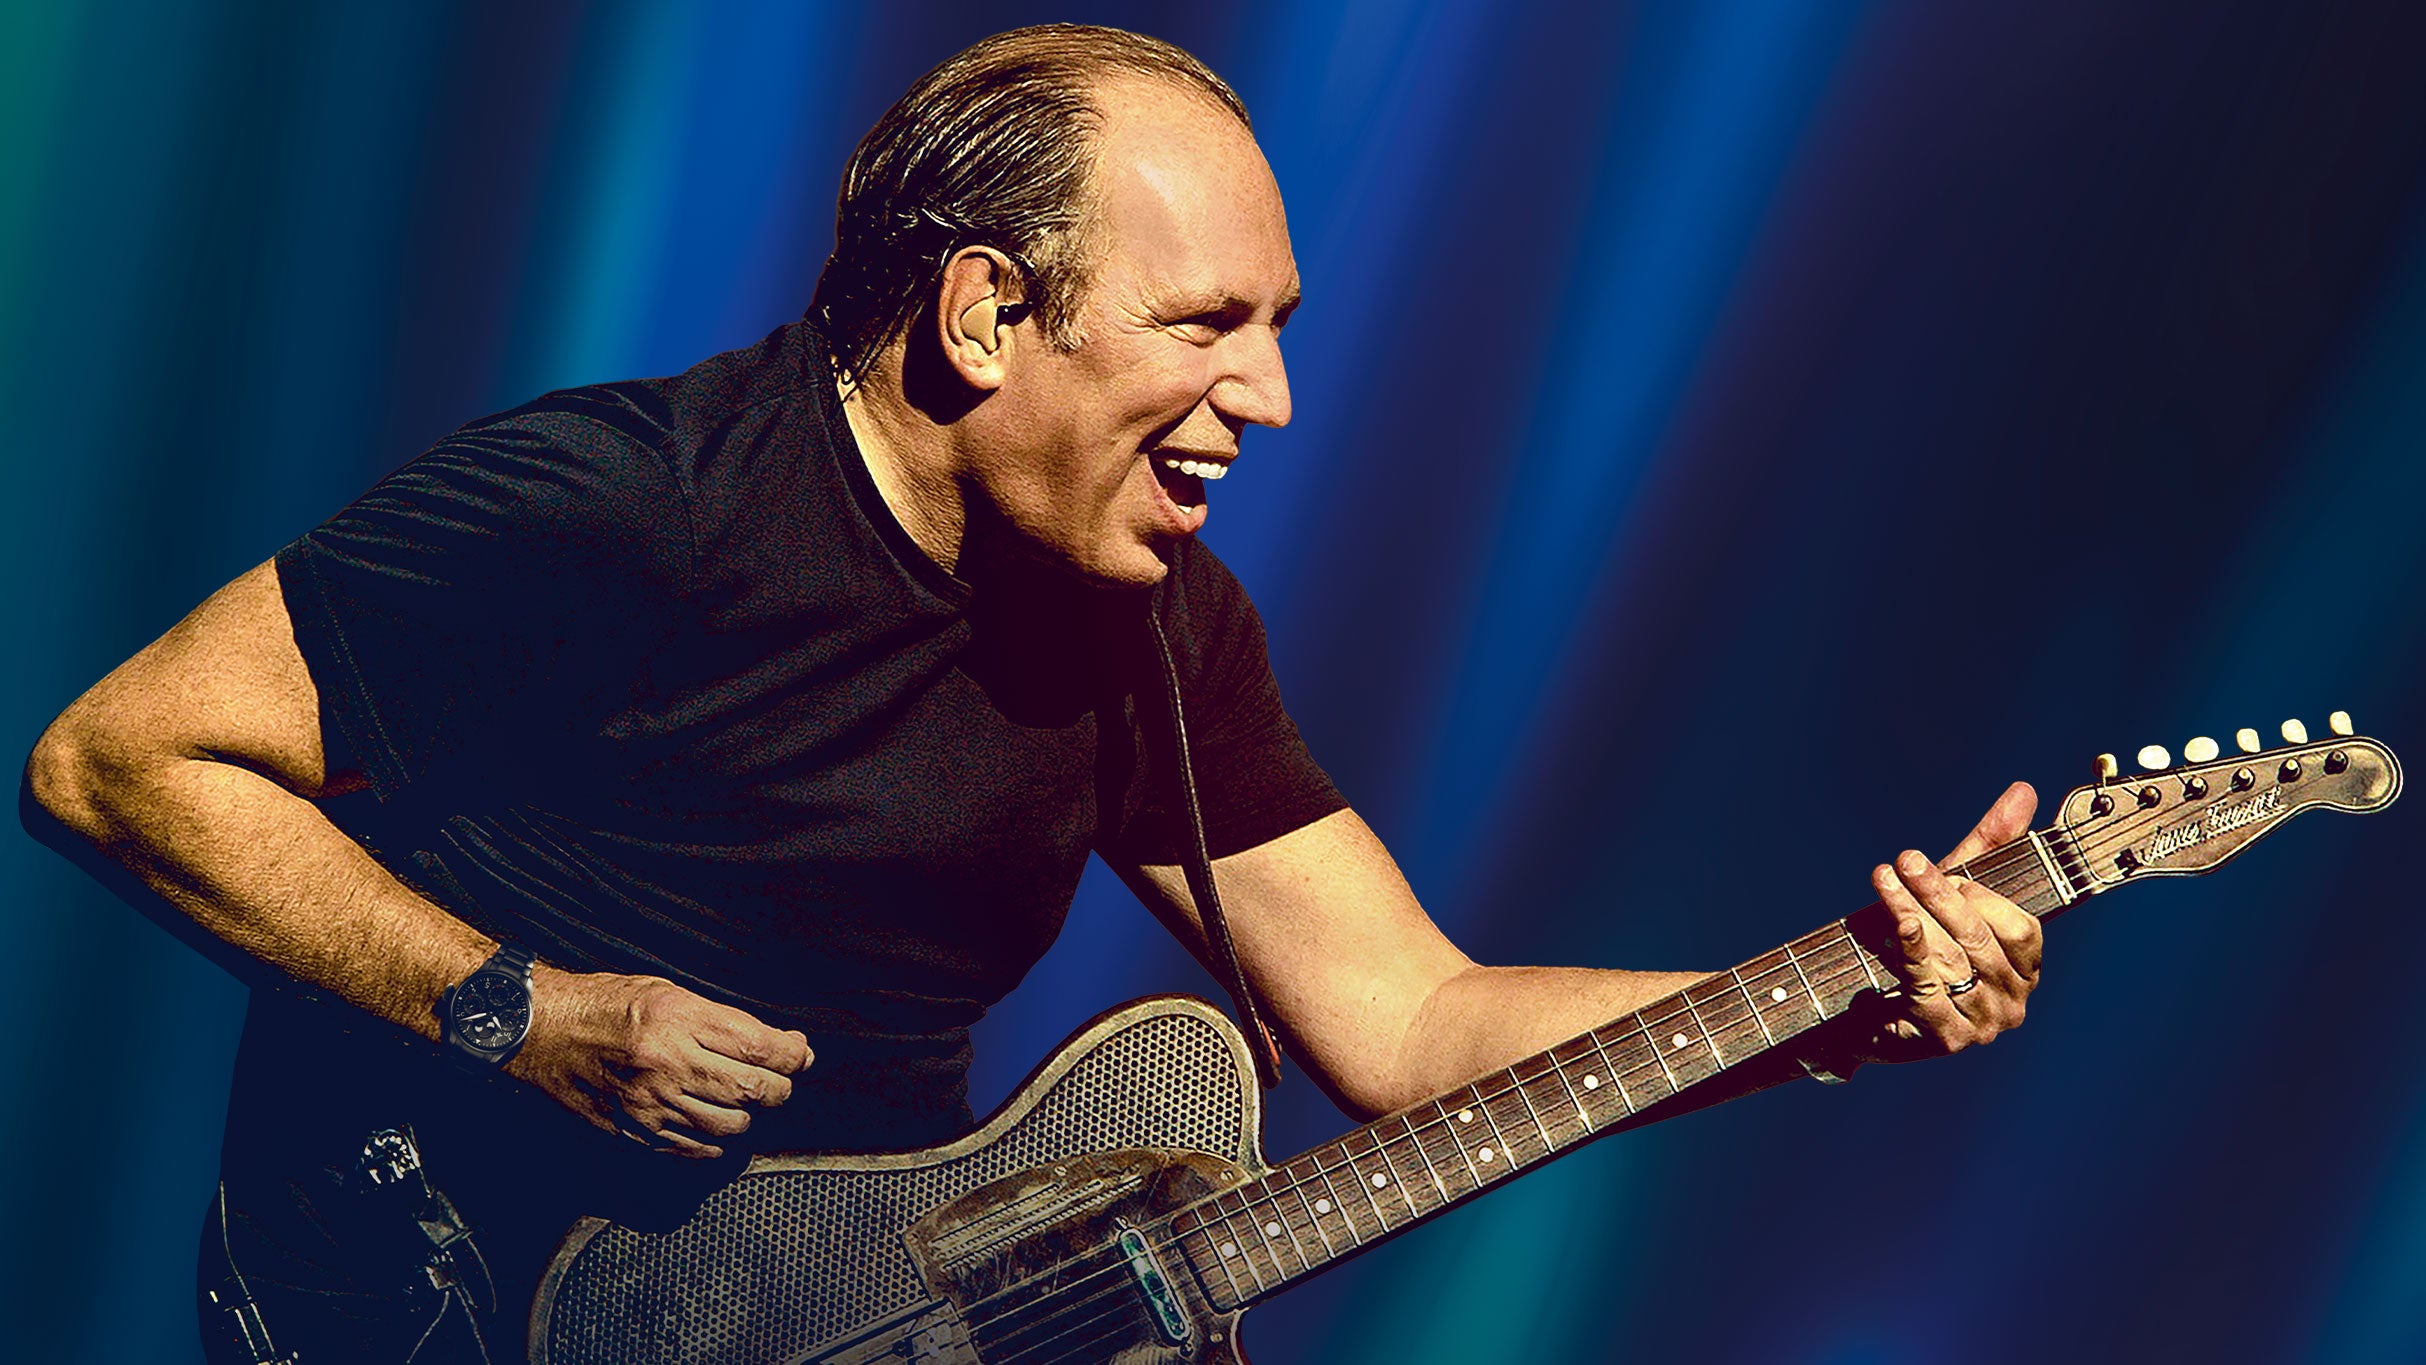 members only presale password for Hans Zimmer Live advanced tickets in Montreal at Centre Bell